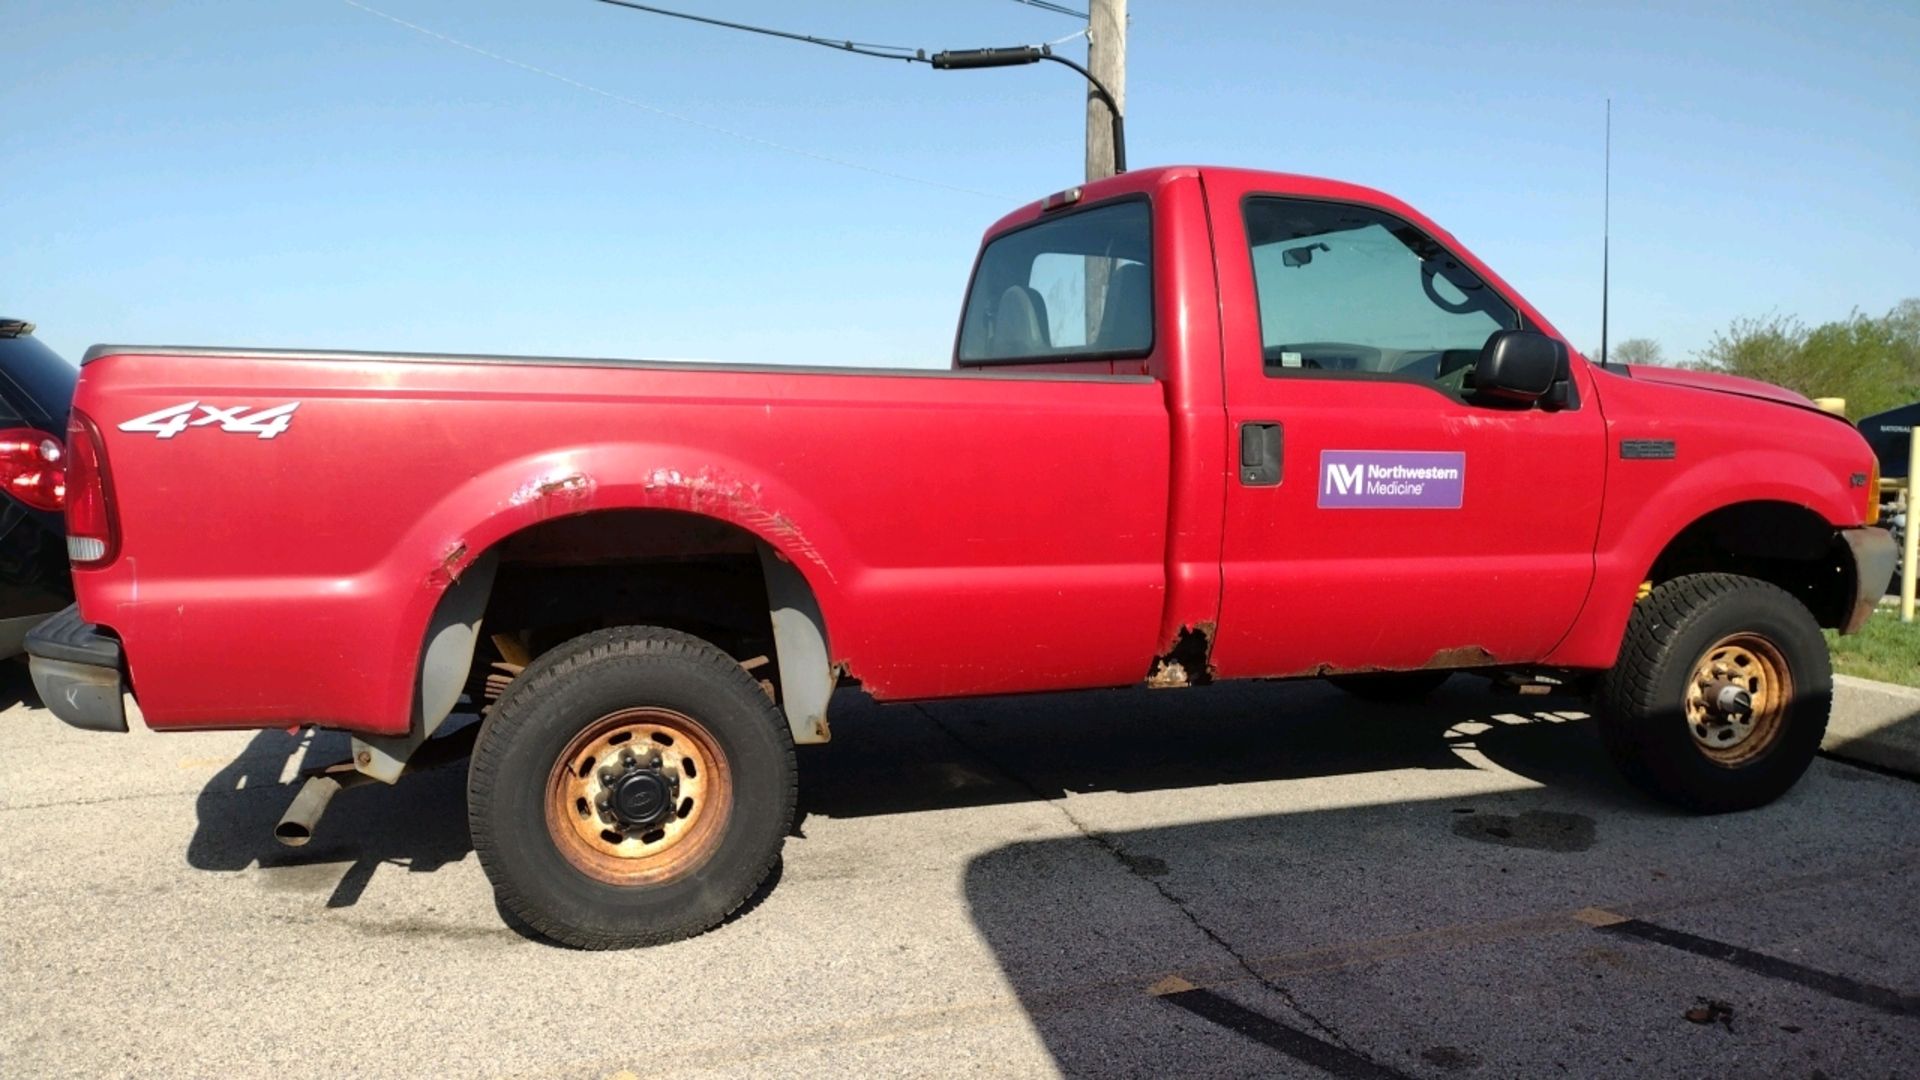 FORD F250 XL SUPER DUTY PICKUP TRUCK (YEAR 2000, VIN#1FTNF21L6YEC43836, MILES:31858, STARTS) ( - Image 4 of 8